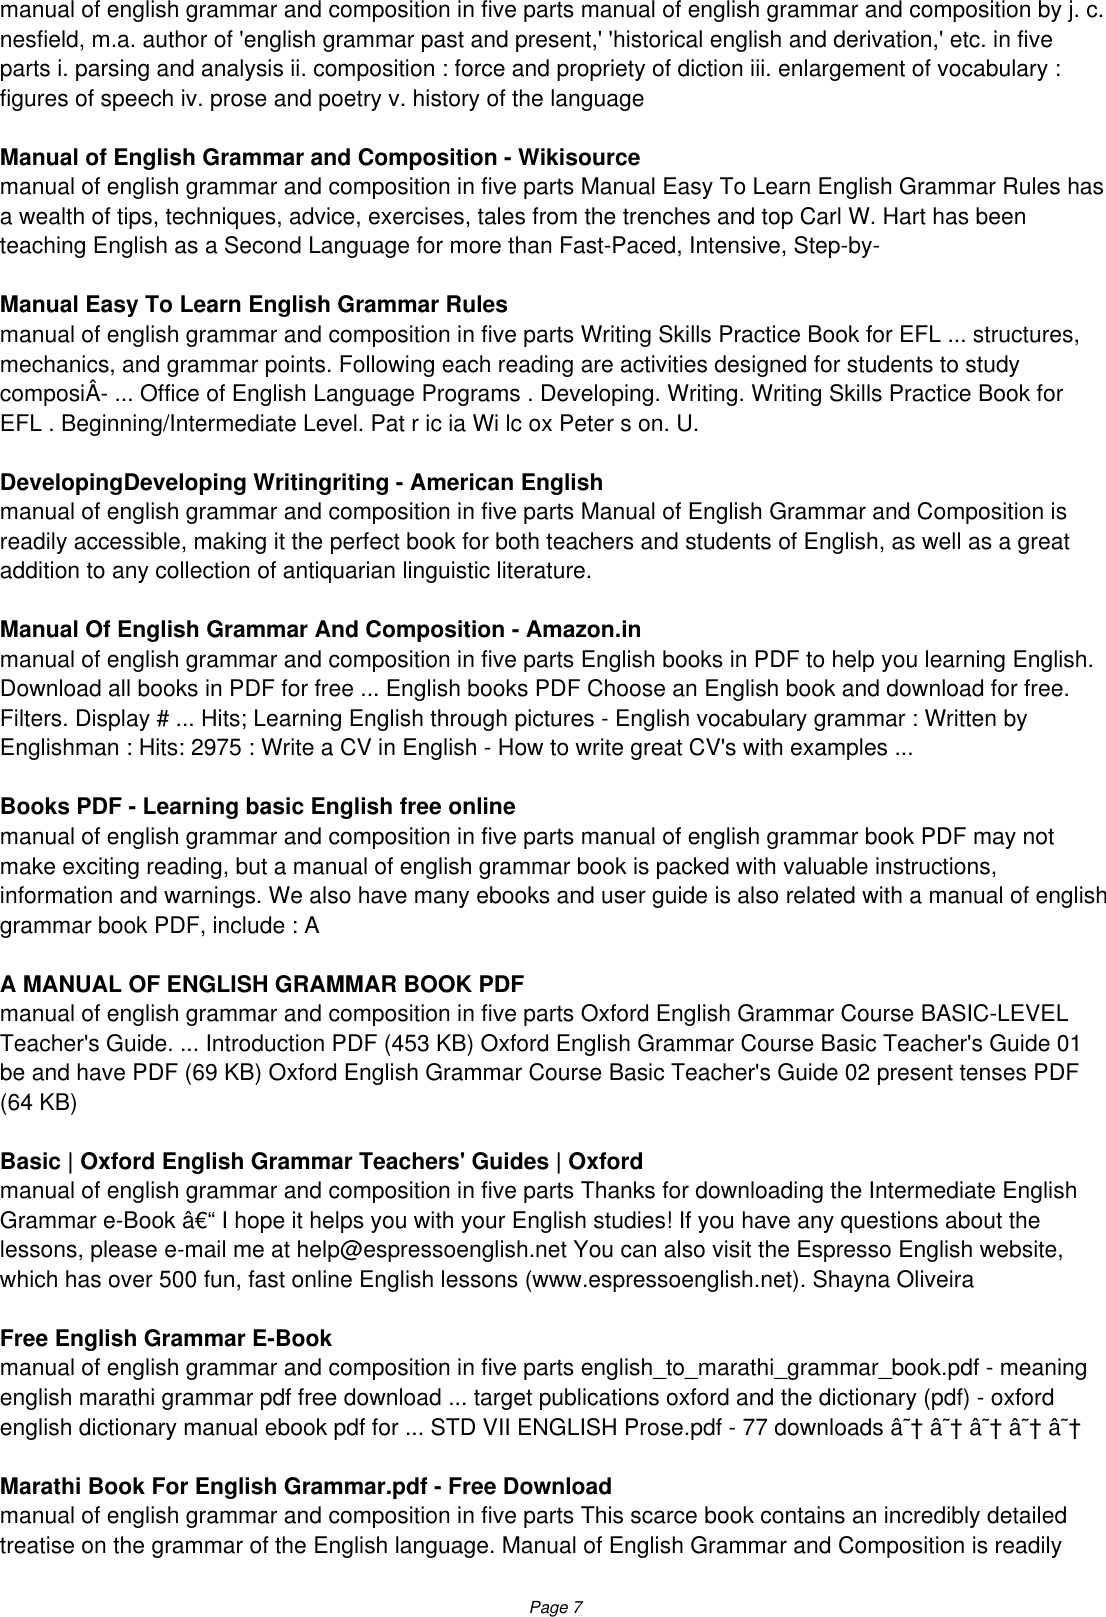 Page 7 of 9 - Manual Of English Grammar And Composition In Five Parts